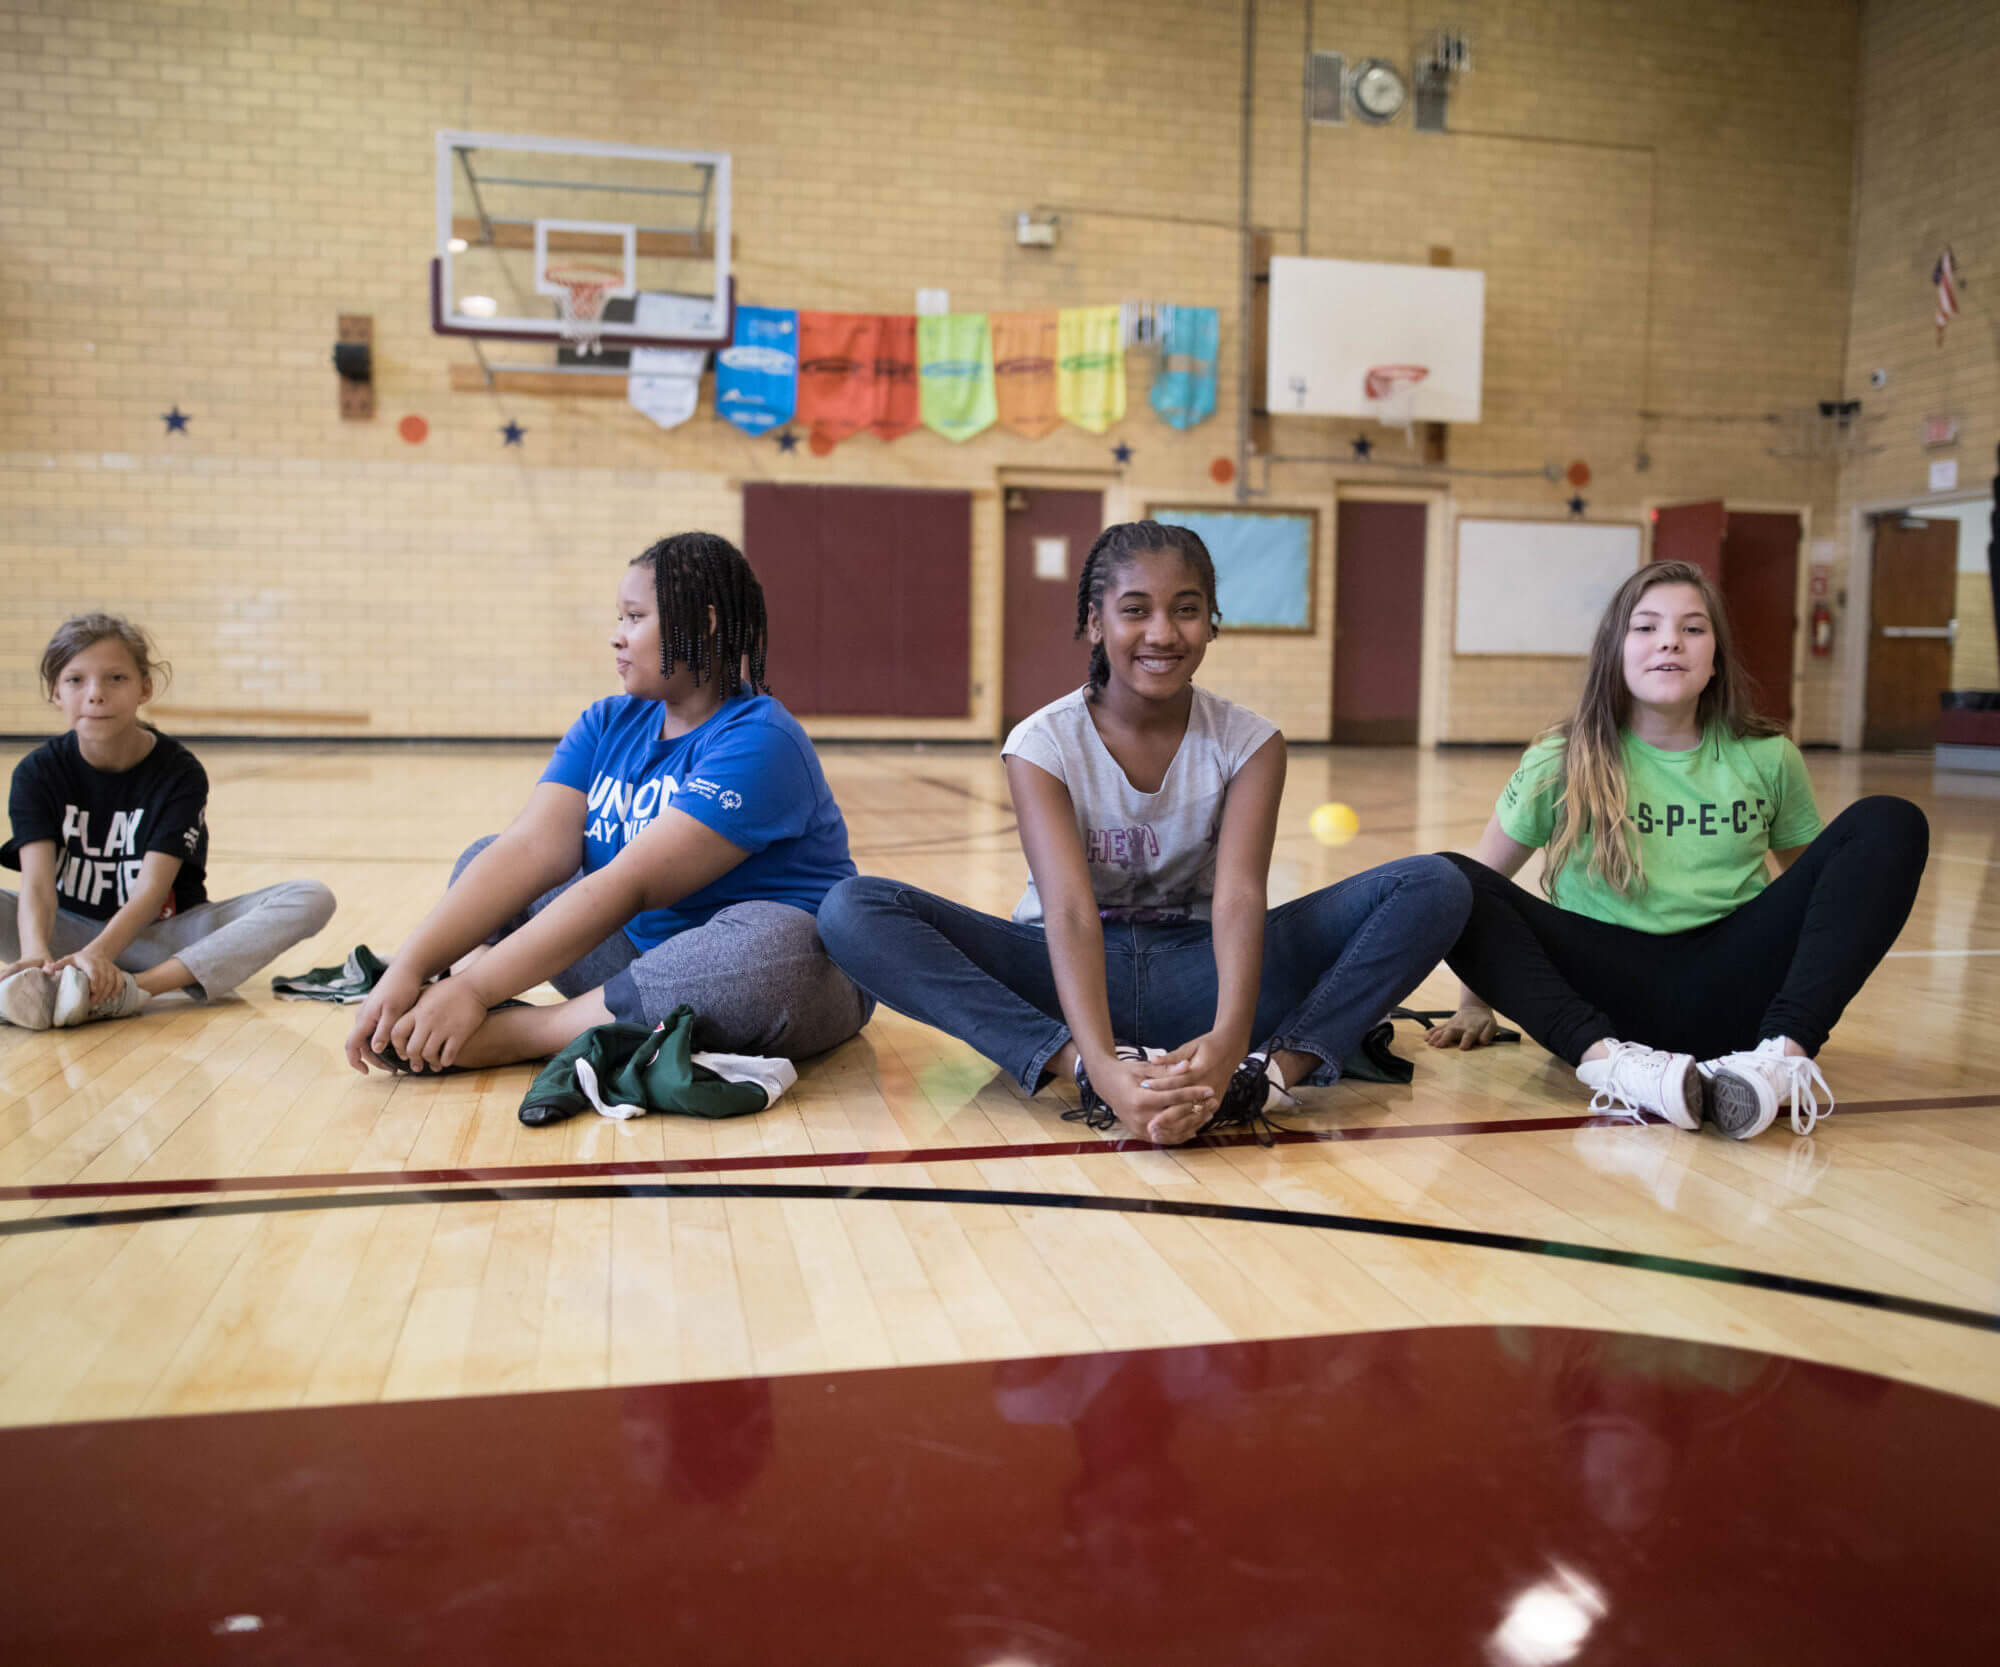 A group of students with and without disabilities doing the butterfly stretch and smiling for the camera.